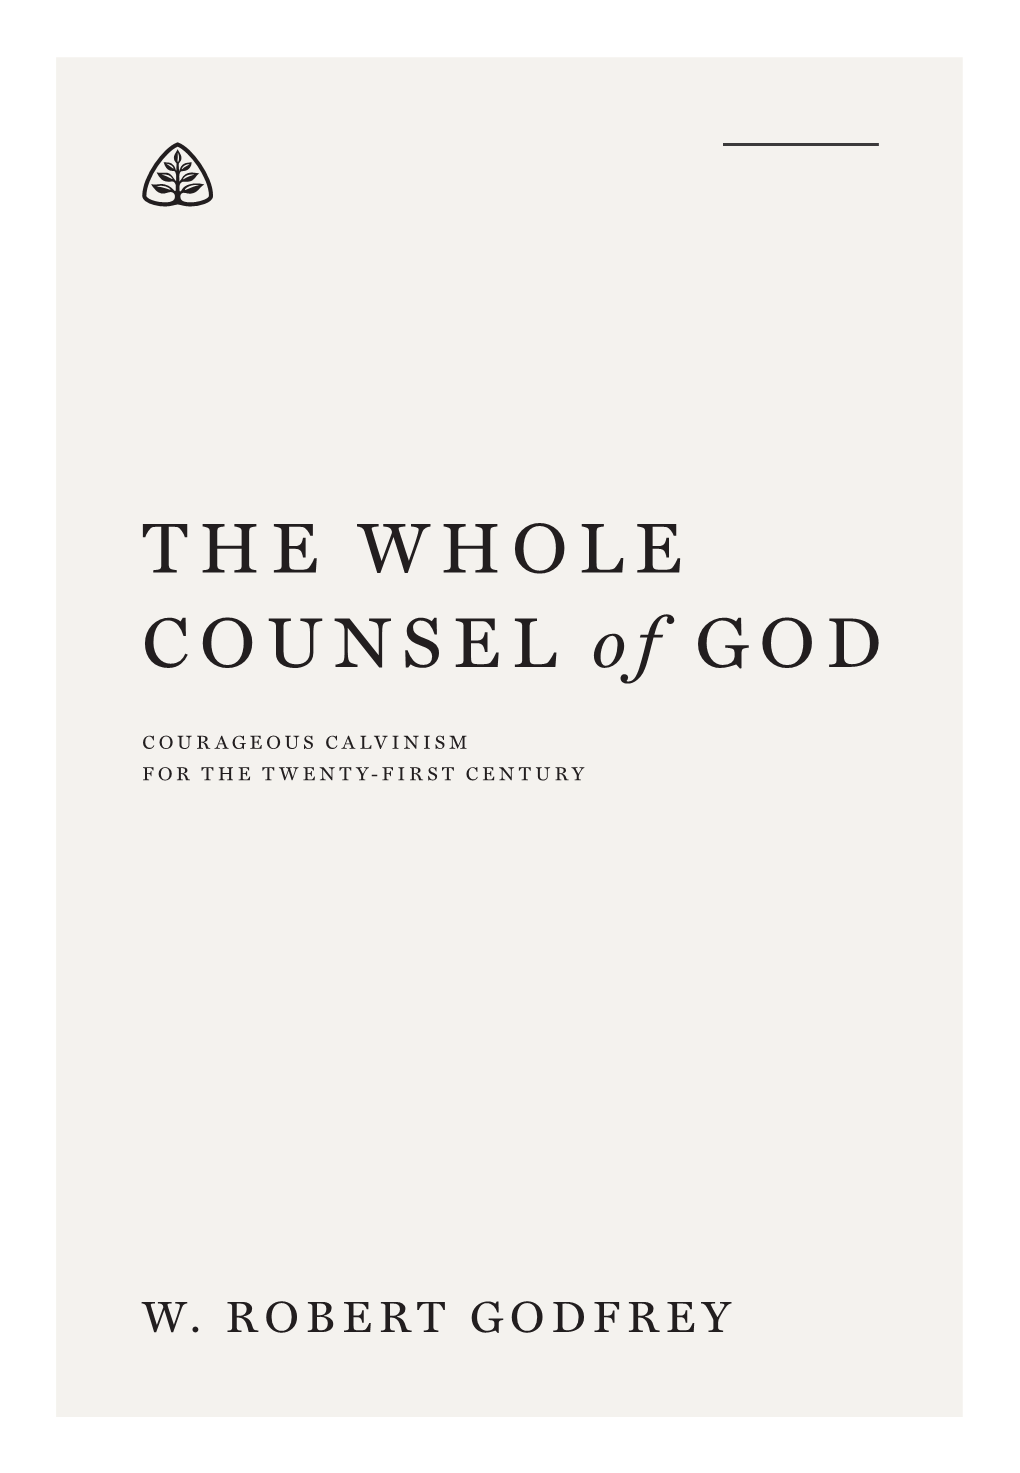 THE WHOLE COUNSEL of GOD